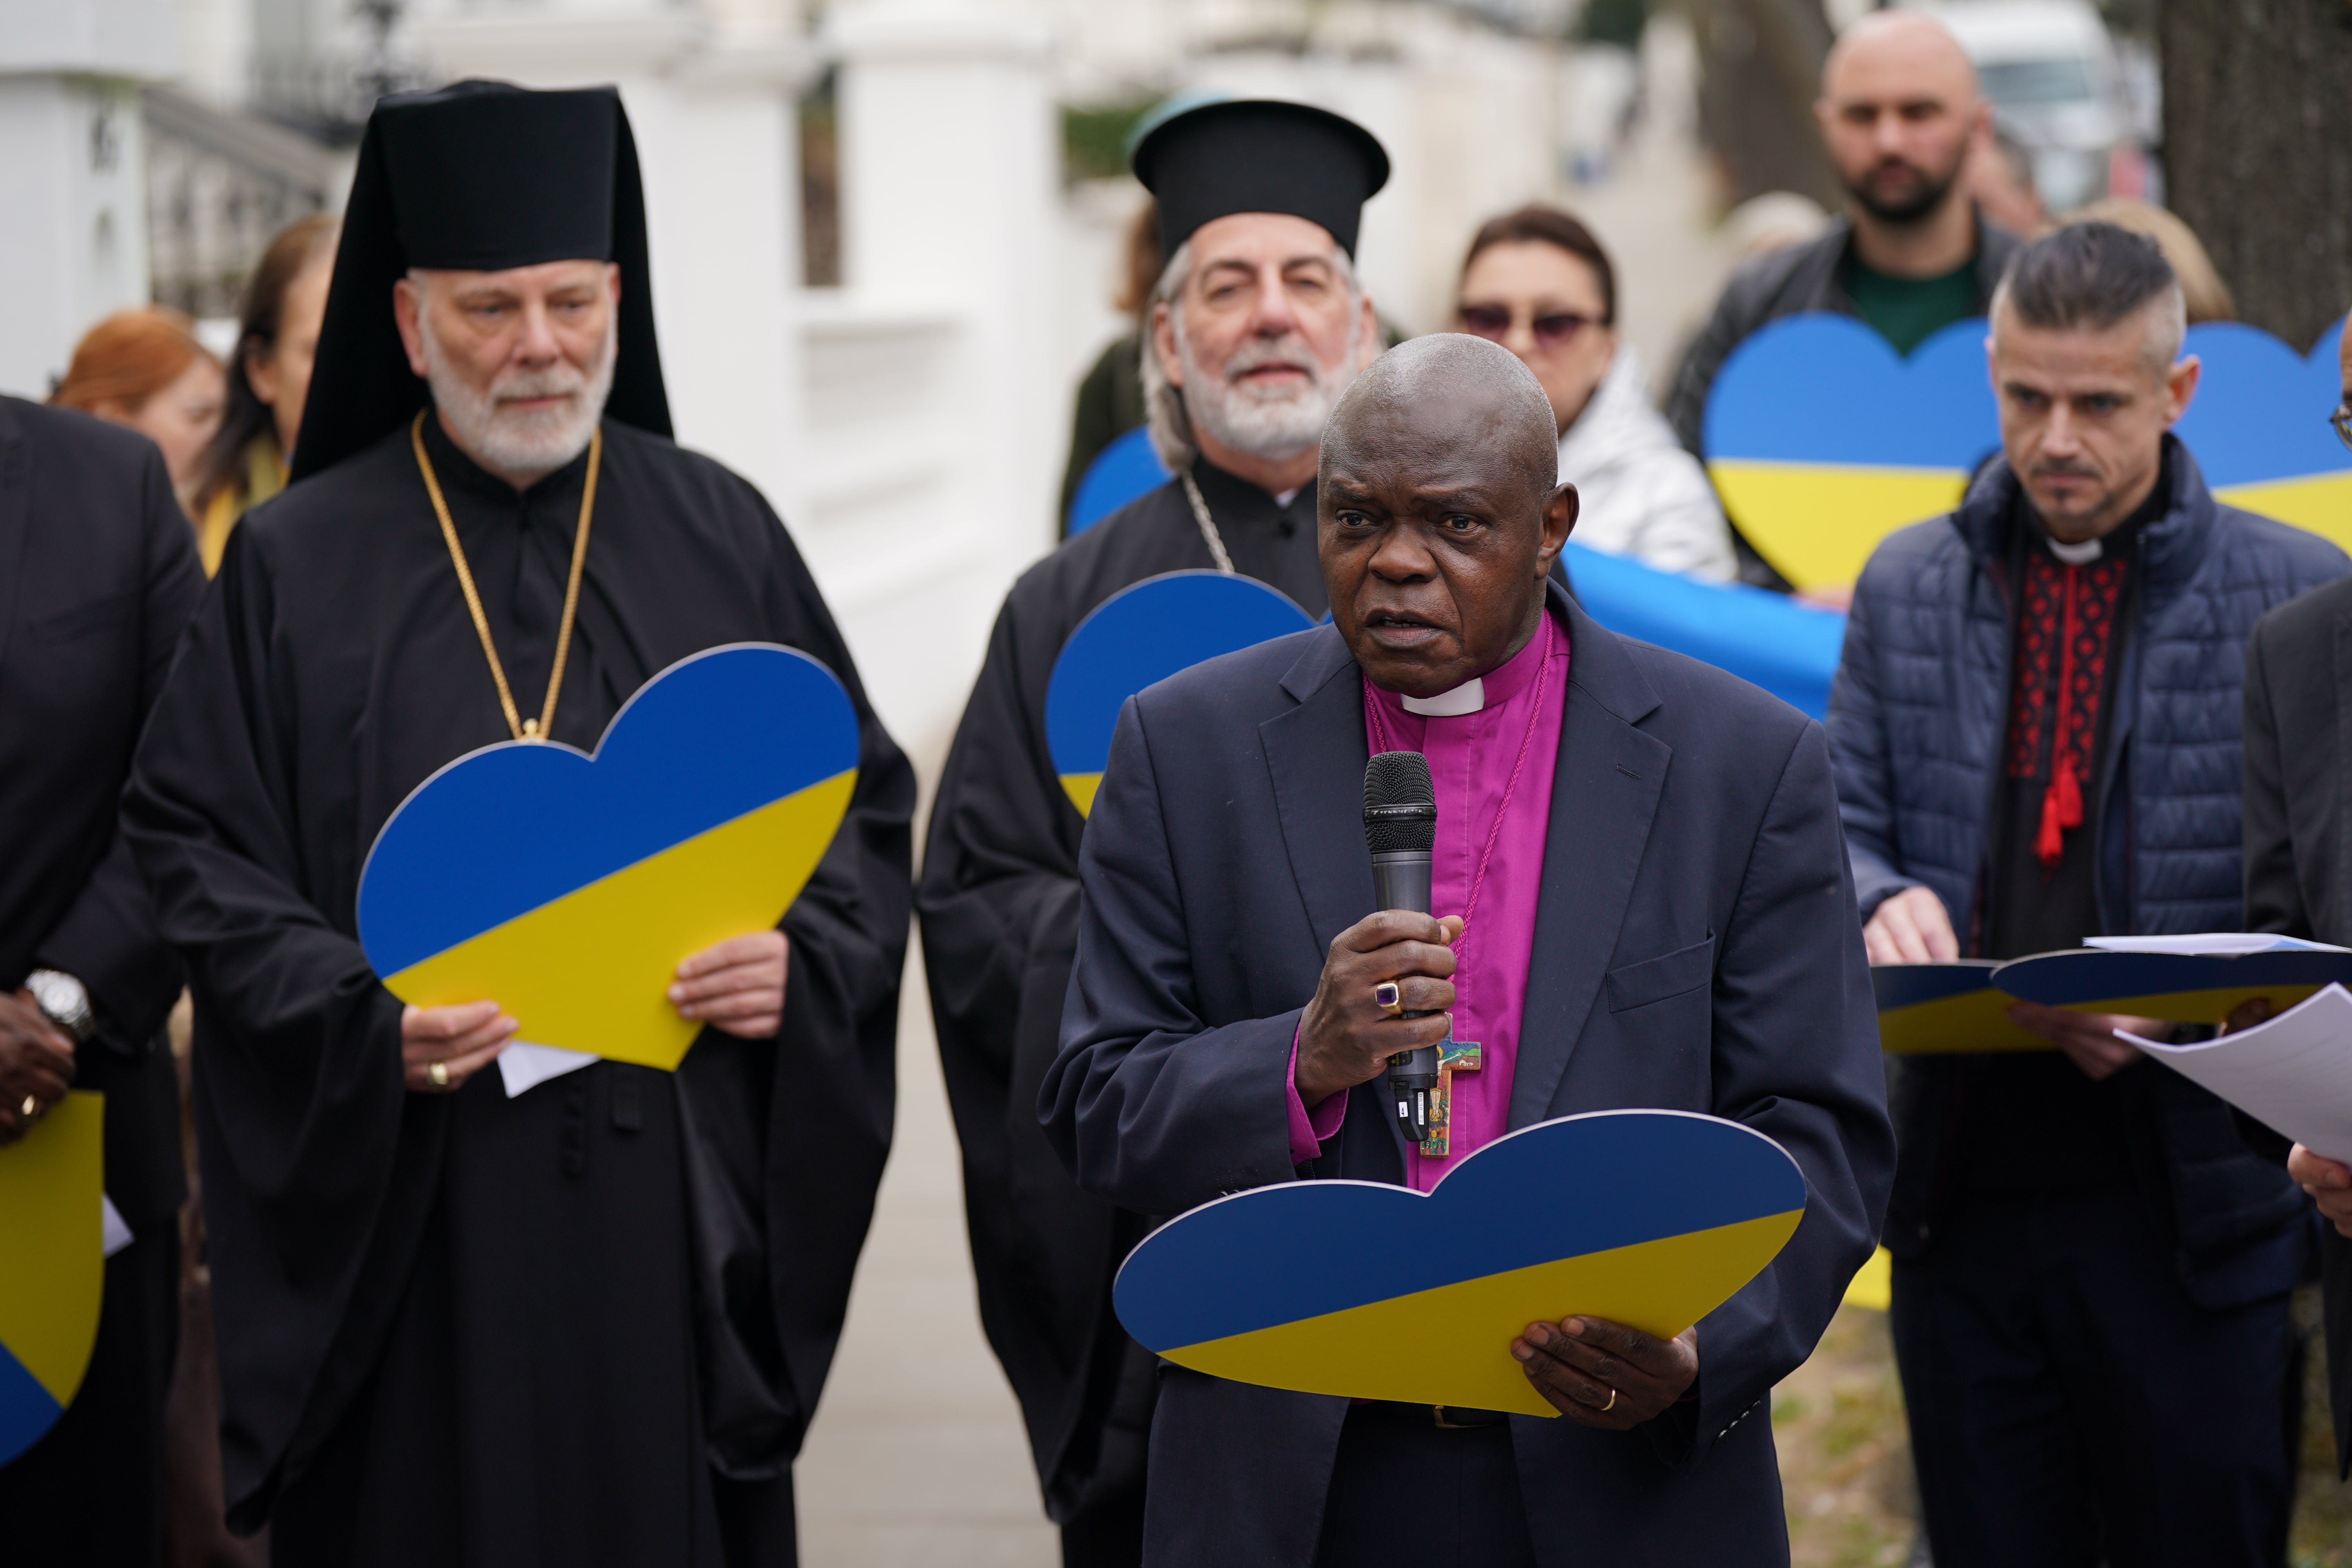 Chairman of Christian Aid and former archbishop of York, John Sentamu, joins other church leaders leading a crowd in an act of witness outside the Ukrainian embassy in Holland Park (Yui Mok/PA)